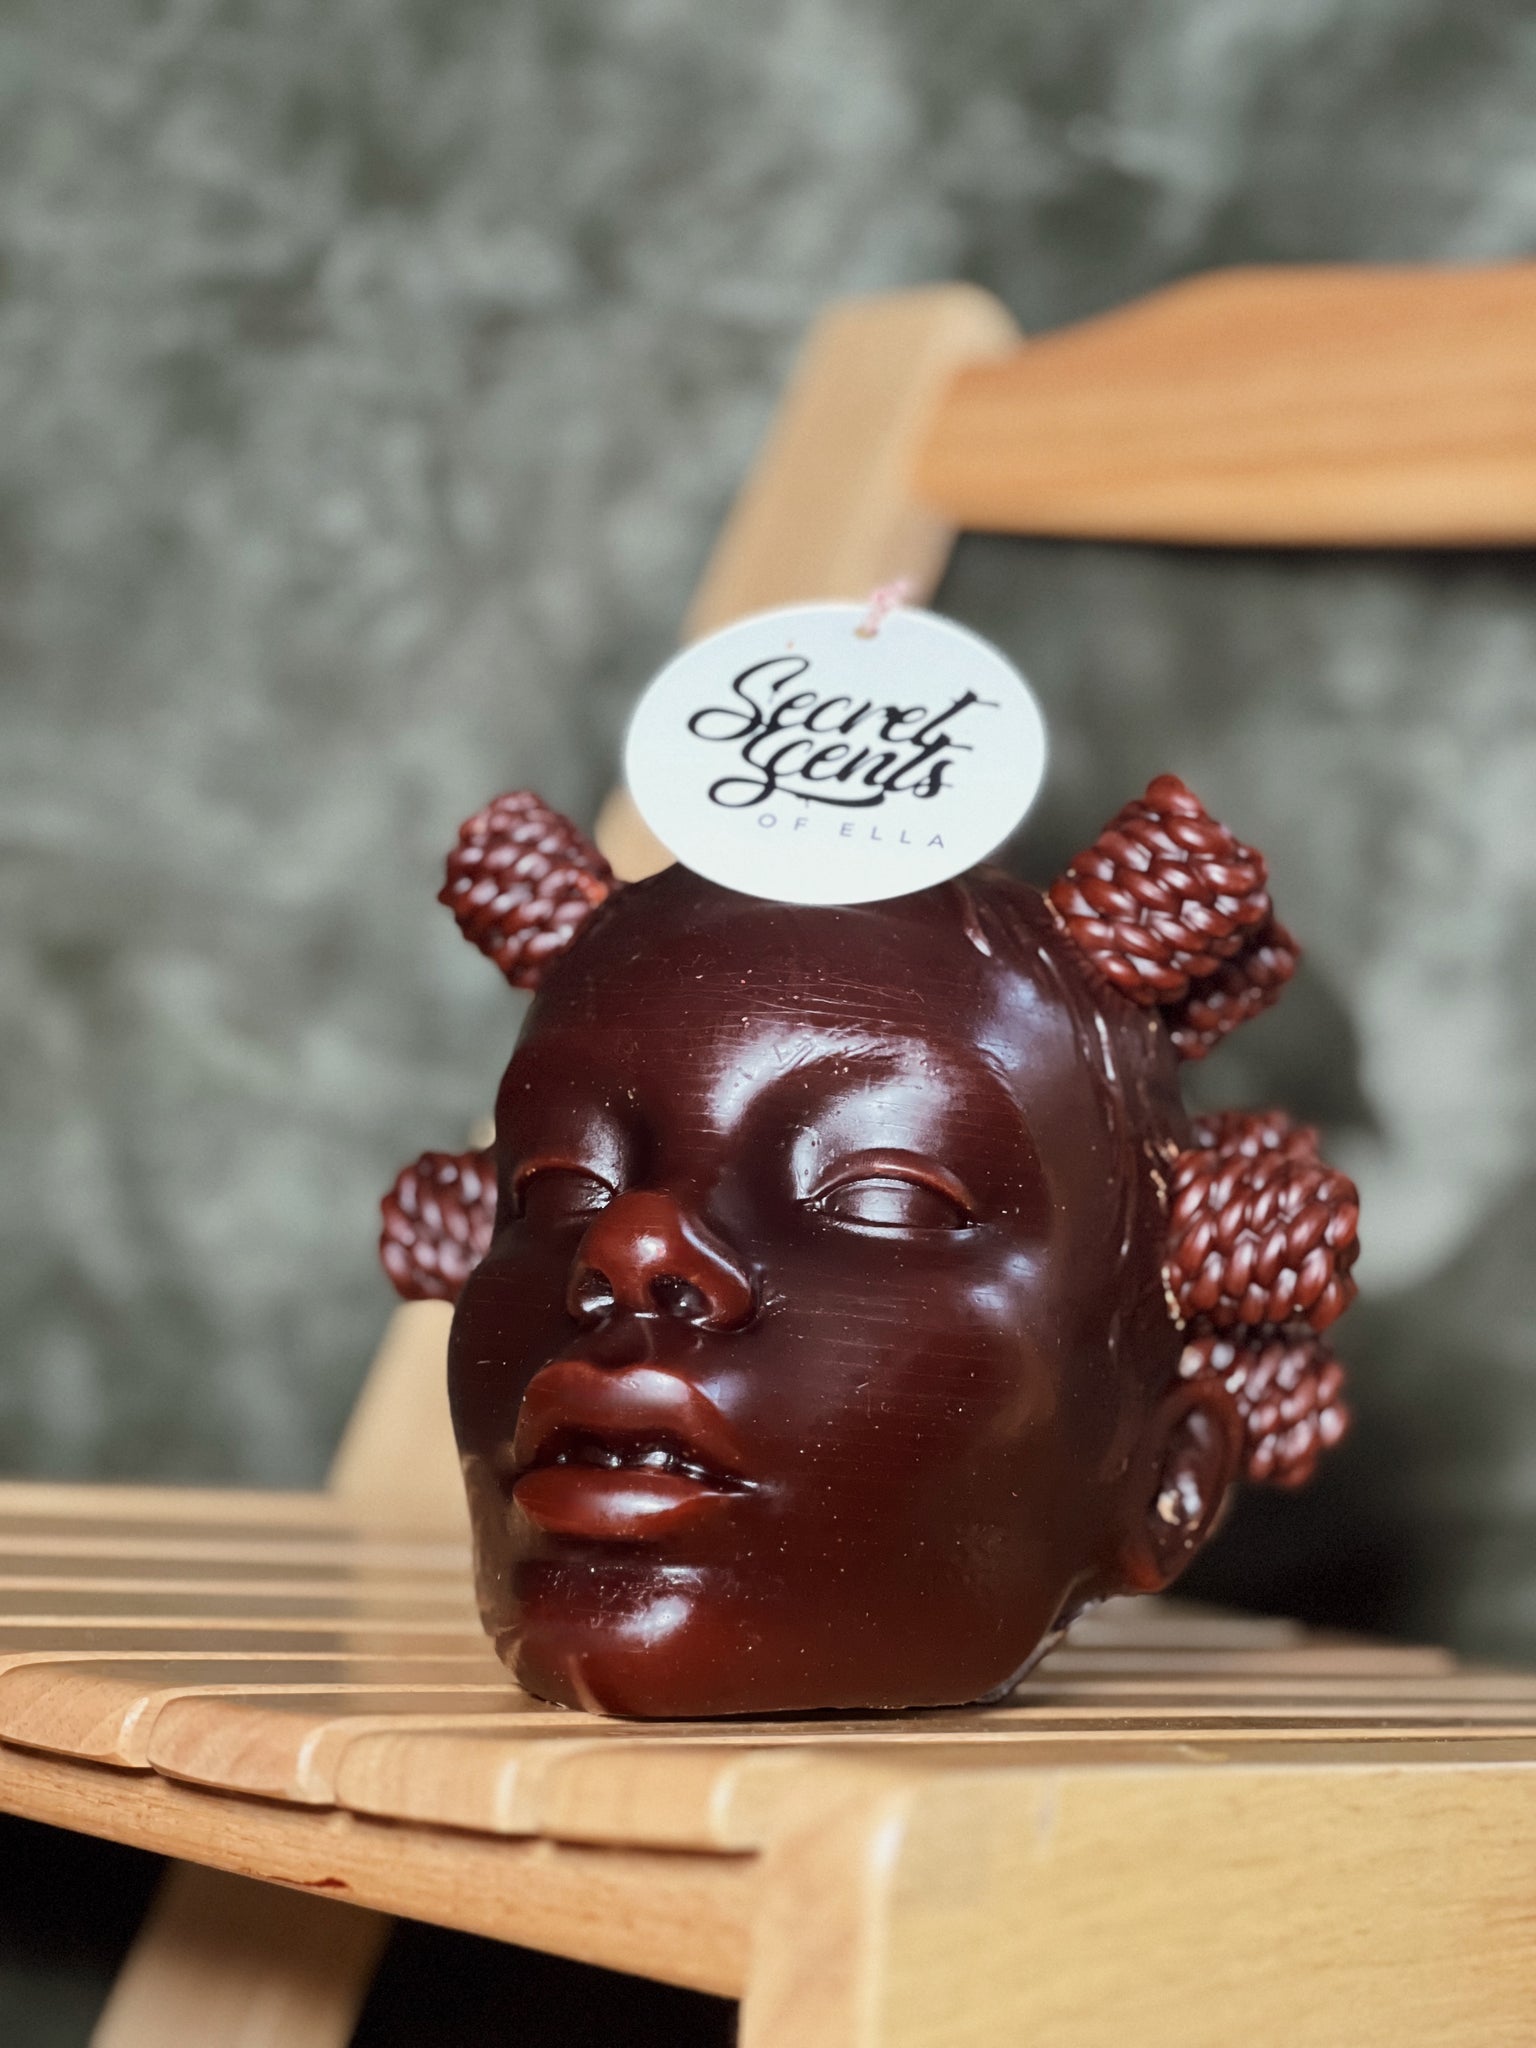 Crown Glory - Secret Scents of Ella bantu knot hairstyle vacation hairstyles for black girls